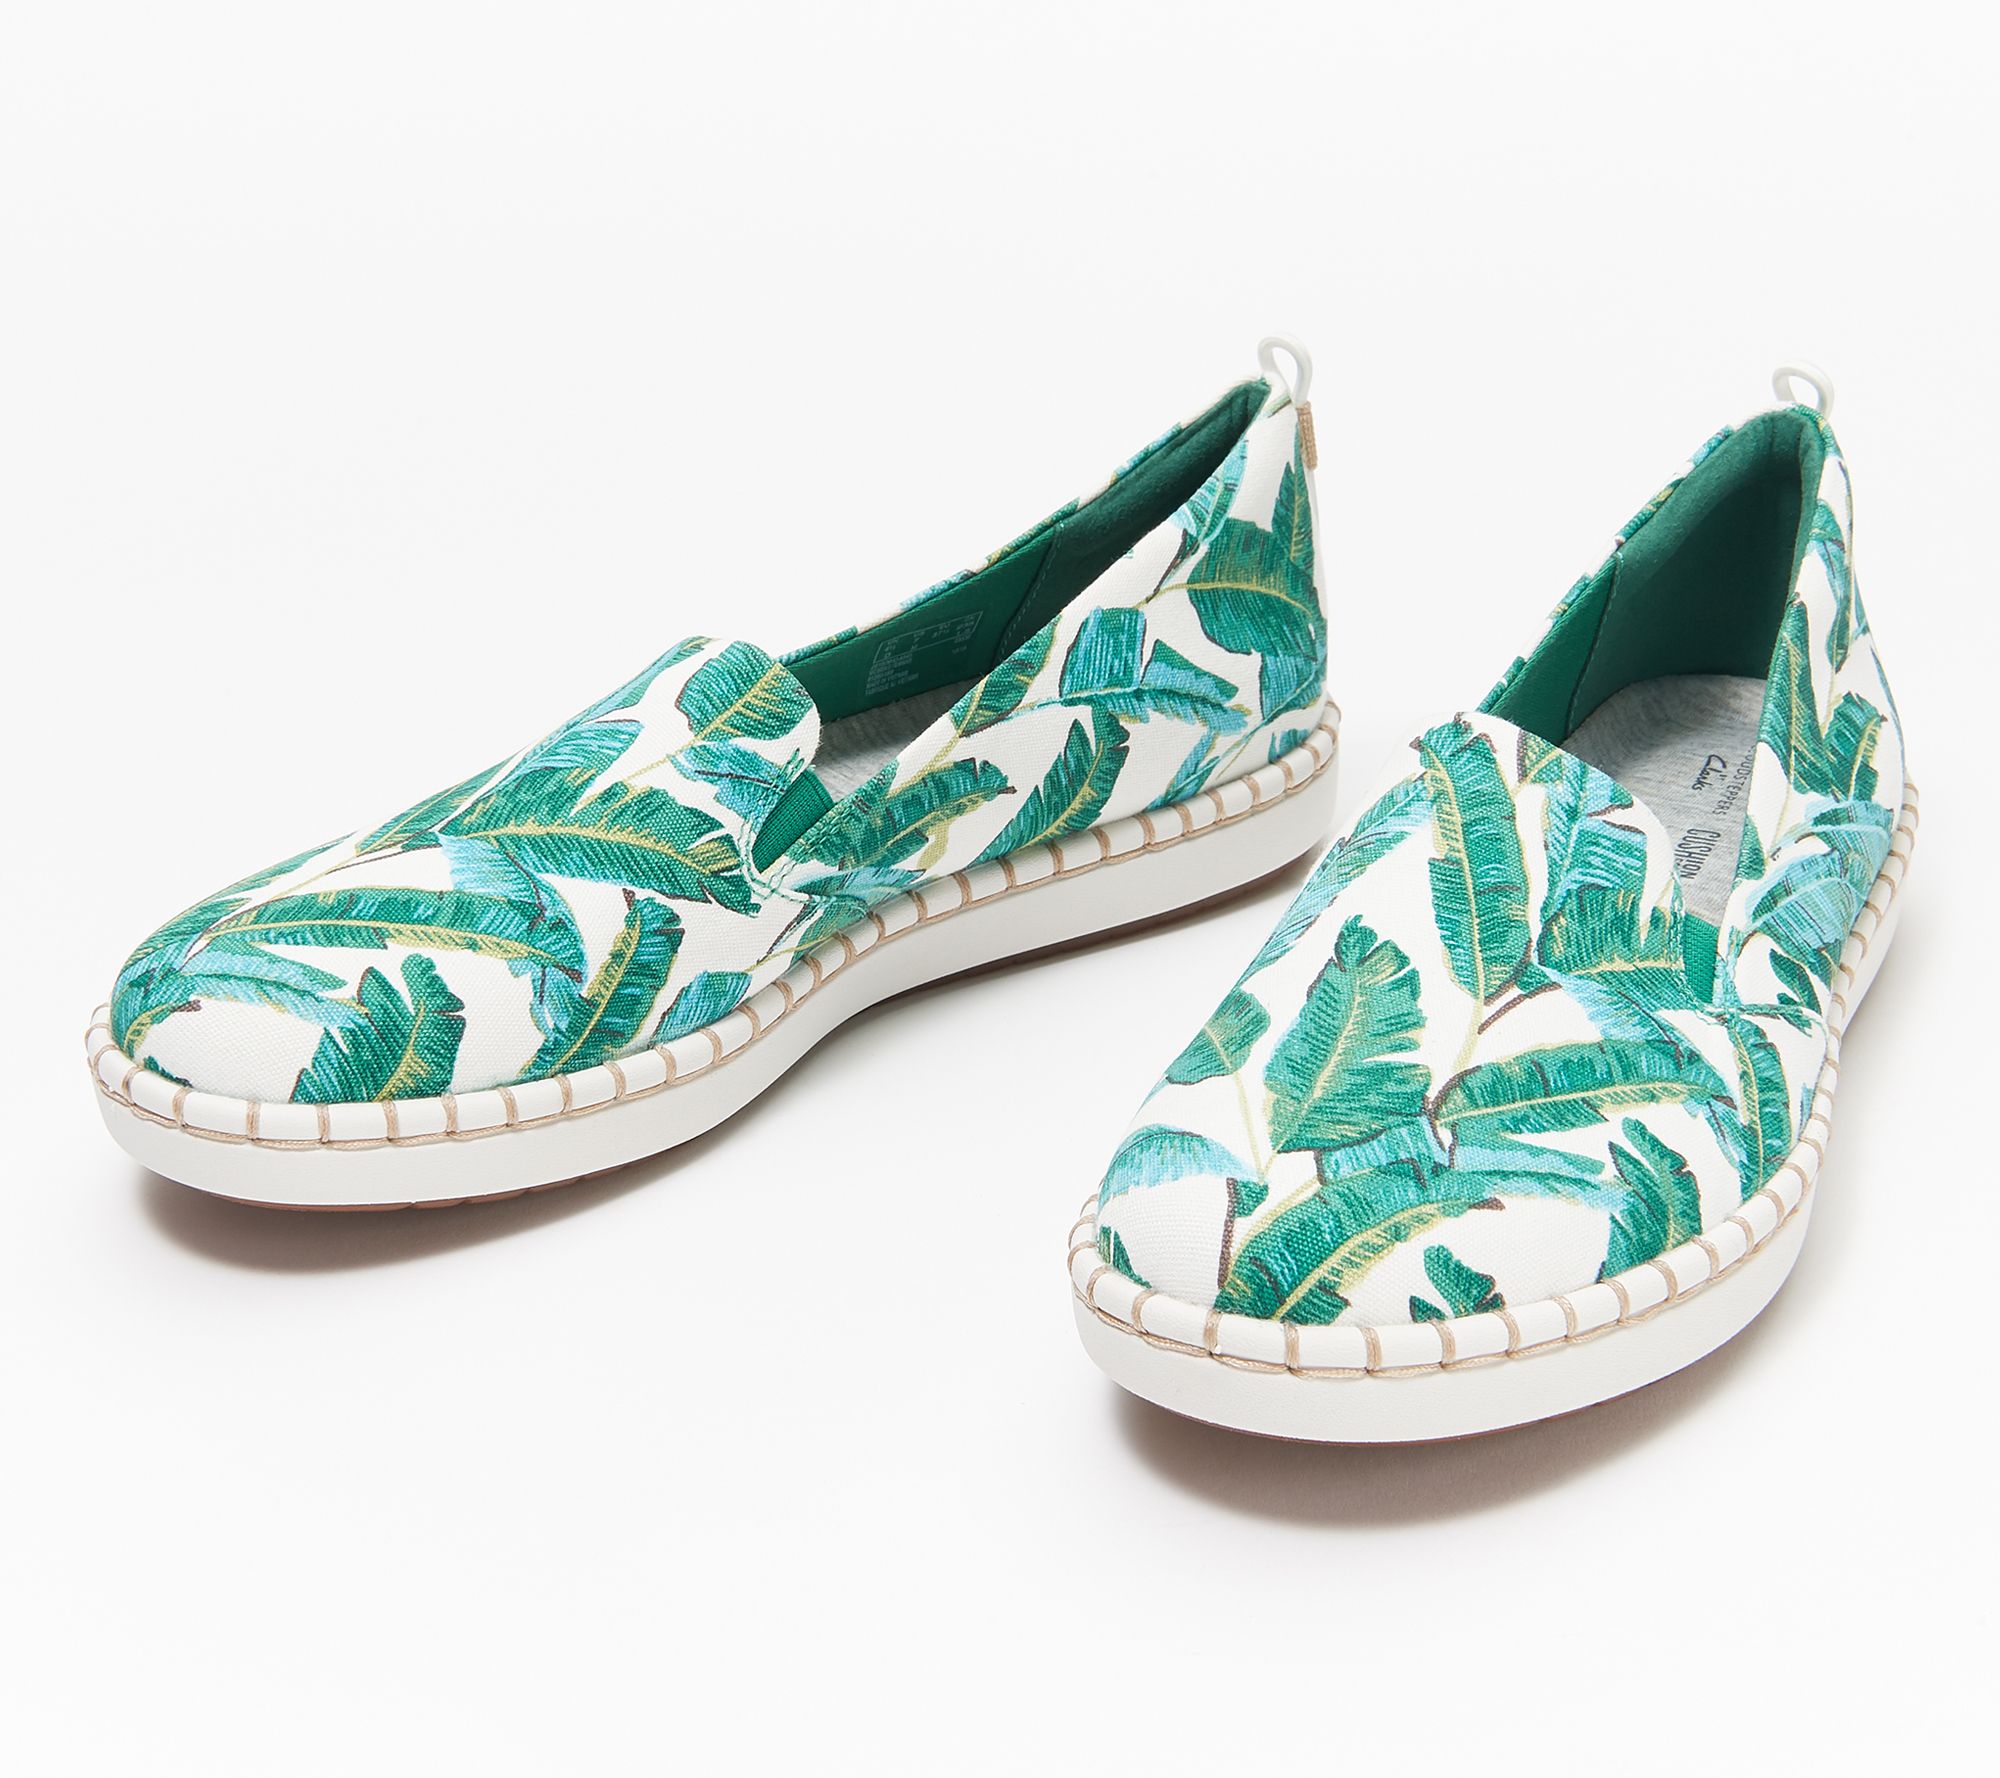 cloudsteppers slip on shoes